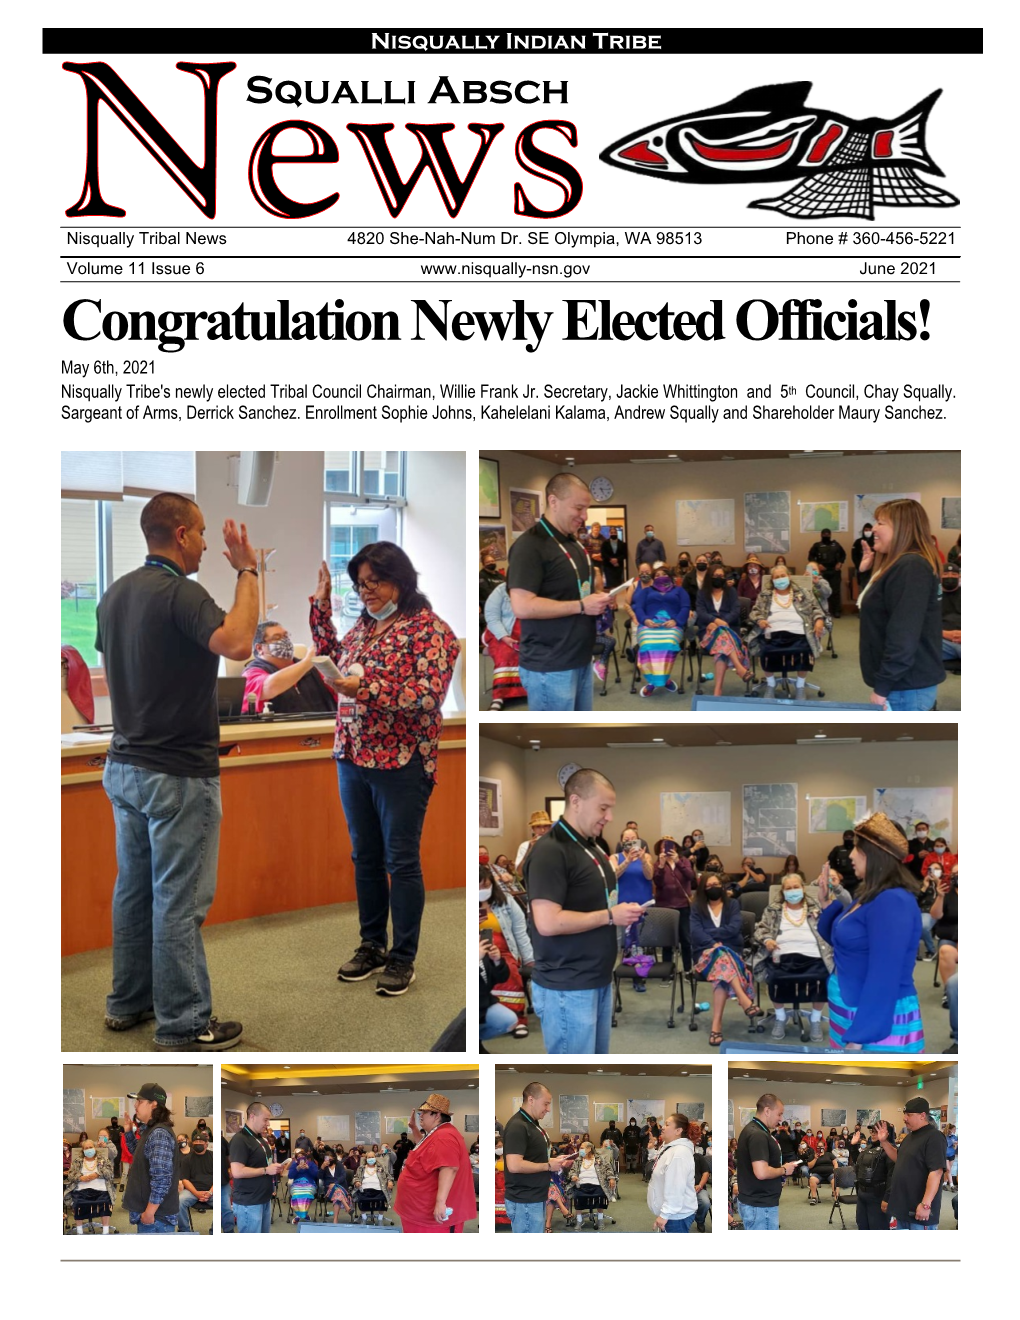 Congratulation Newly Elected Officials! May 6Th, 2021 Nisqually Tribe's Newly Elected Tribal Council Chairman, Willie Frank Jr